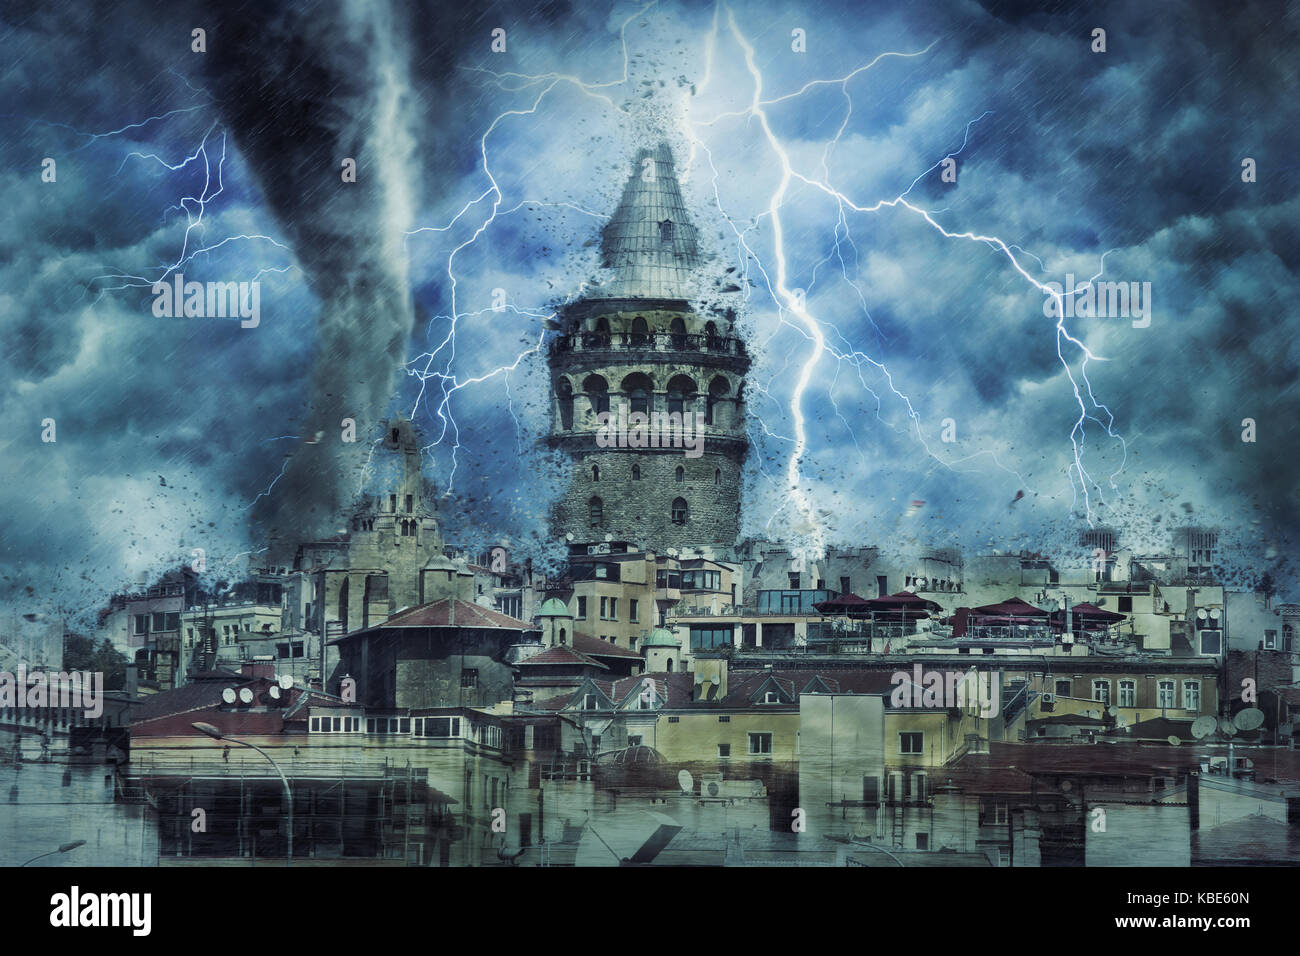 galata tower in the middle of the hurricane Stock Photo